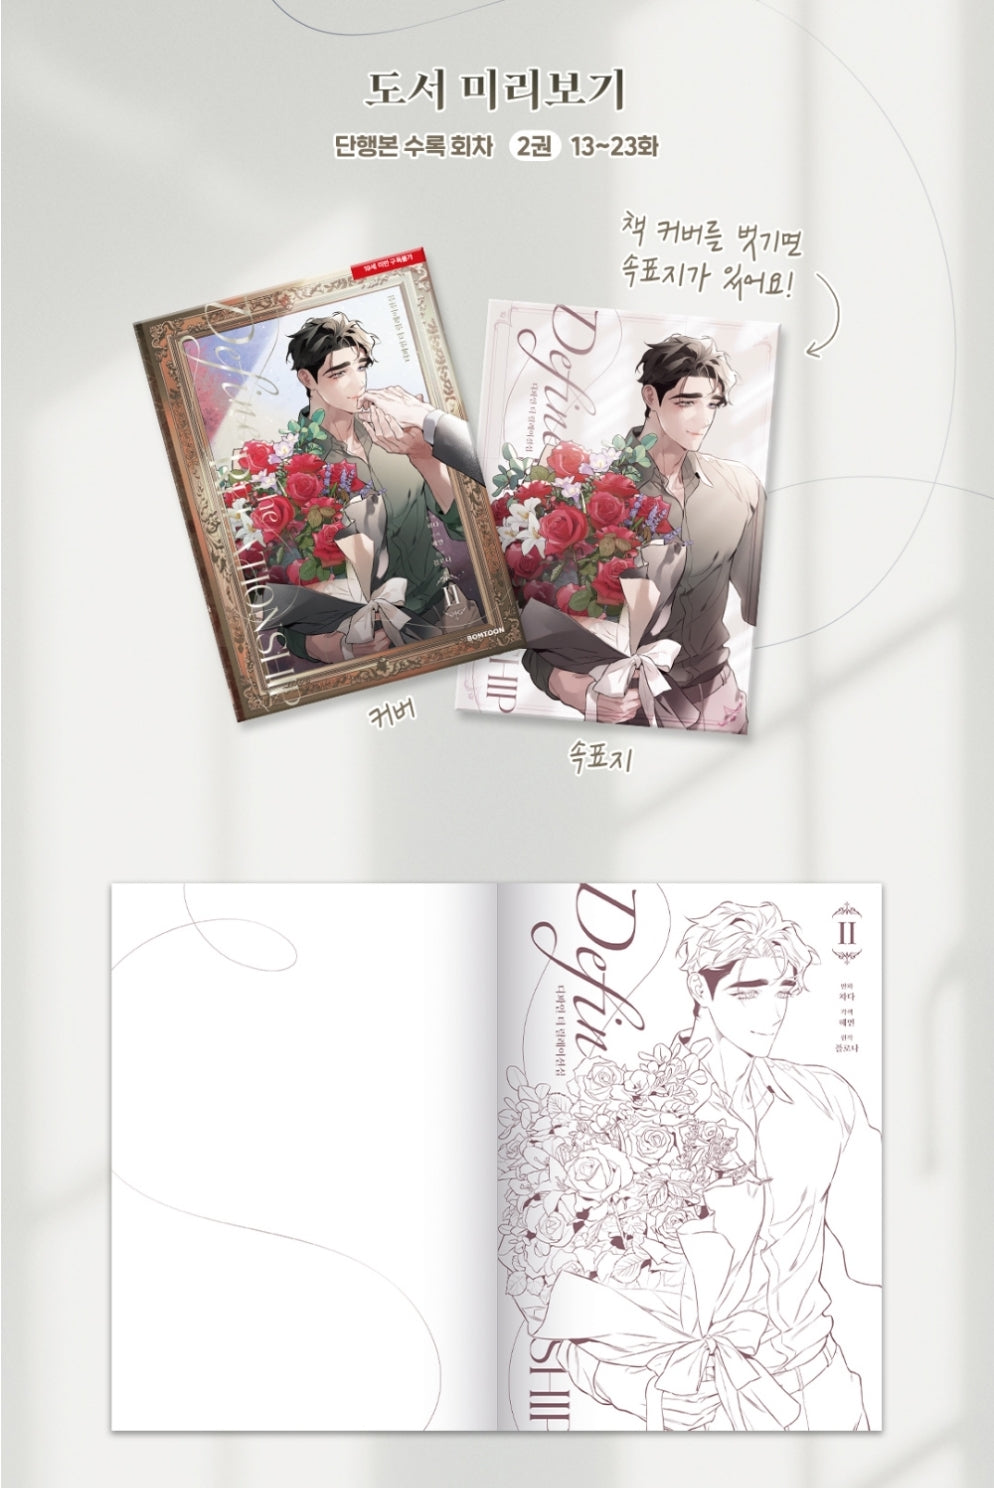 [in stock][Limited Edition] Define The Relationship : Limited Edition vol.2